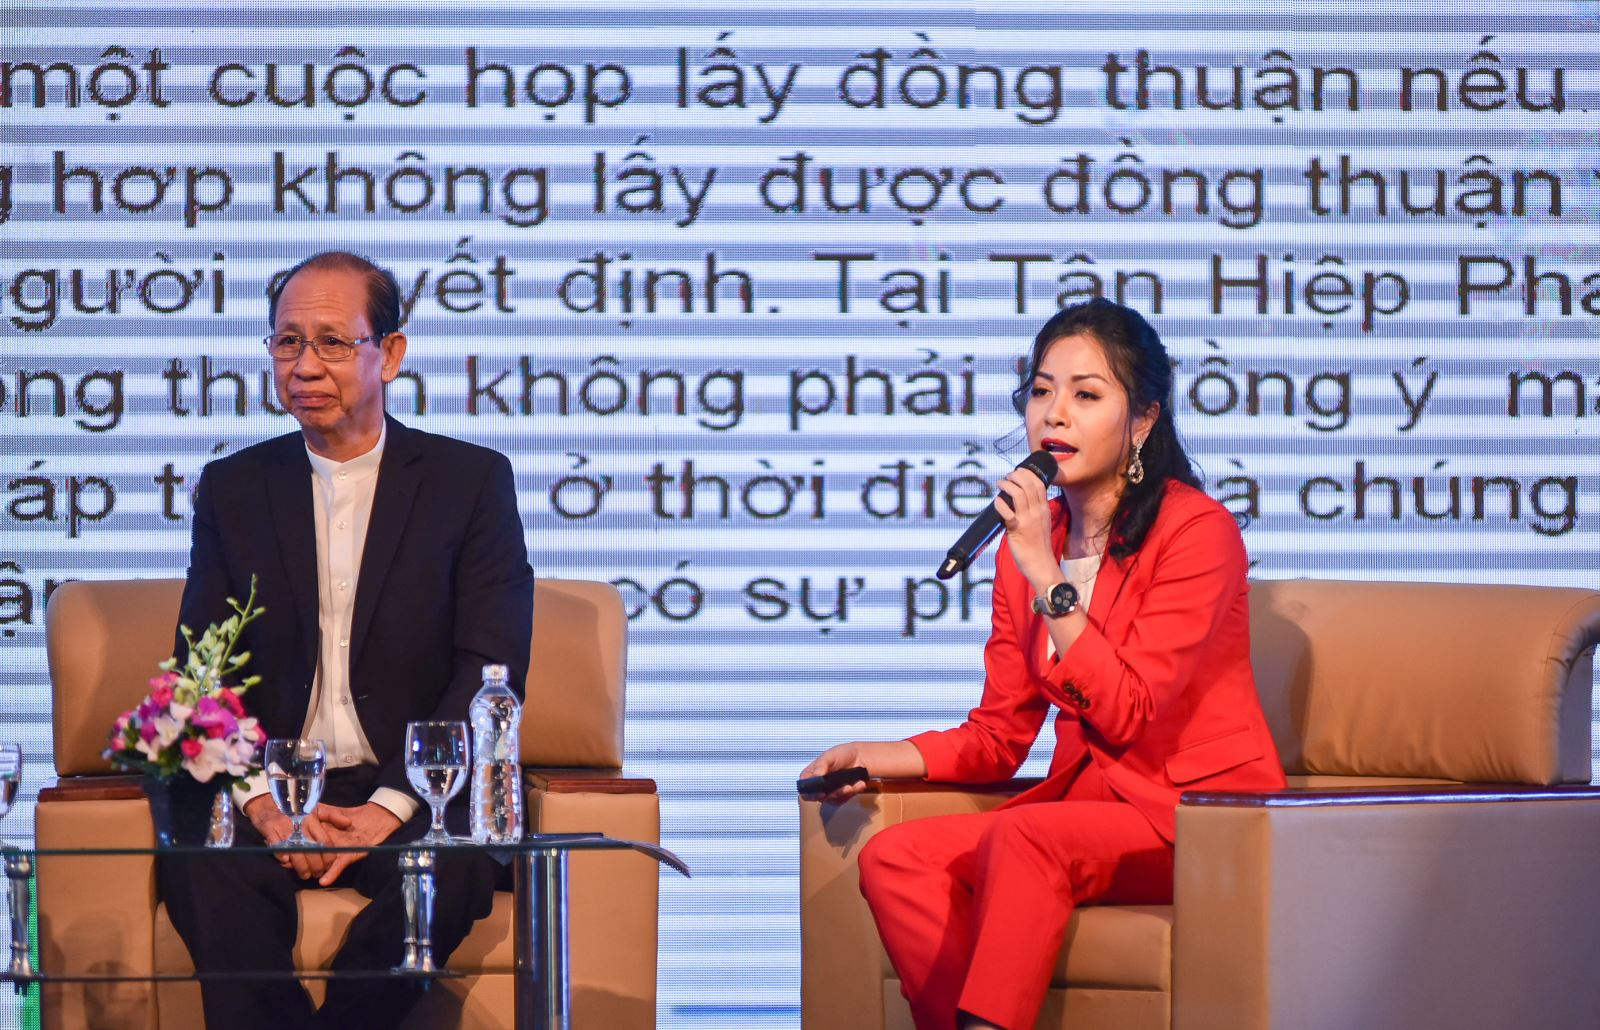 Phuong Uyen Tran: Creativity along with corporate culture help promote the growth of business post Covid-19